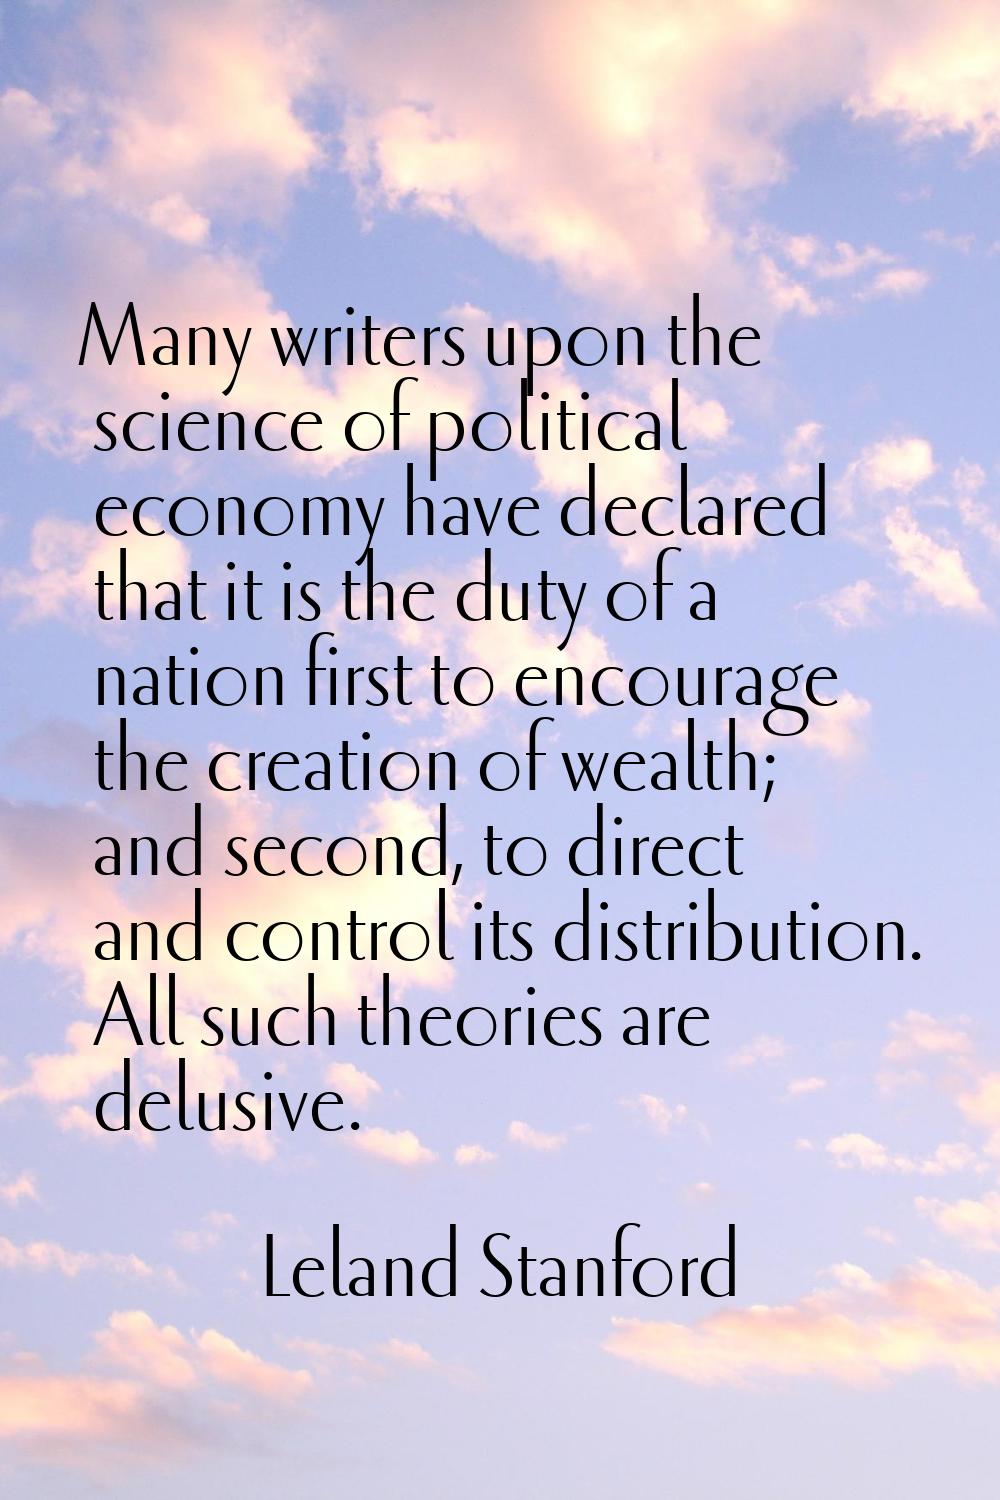 Many writers upon the science of political economy have declared that it is the duty of a nation fi